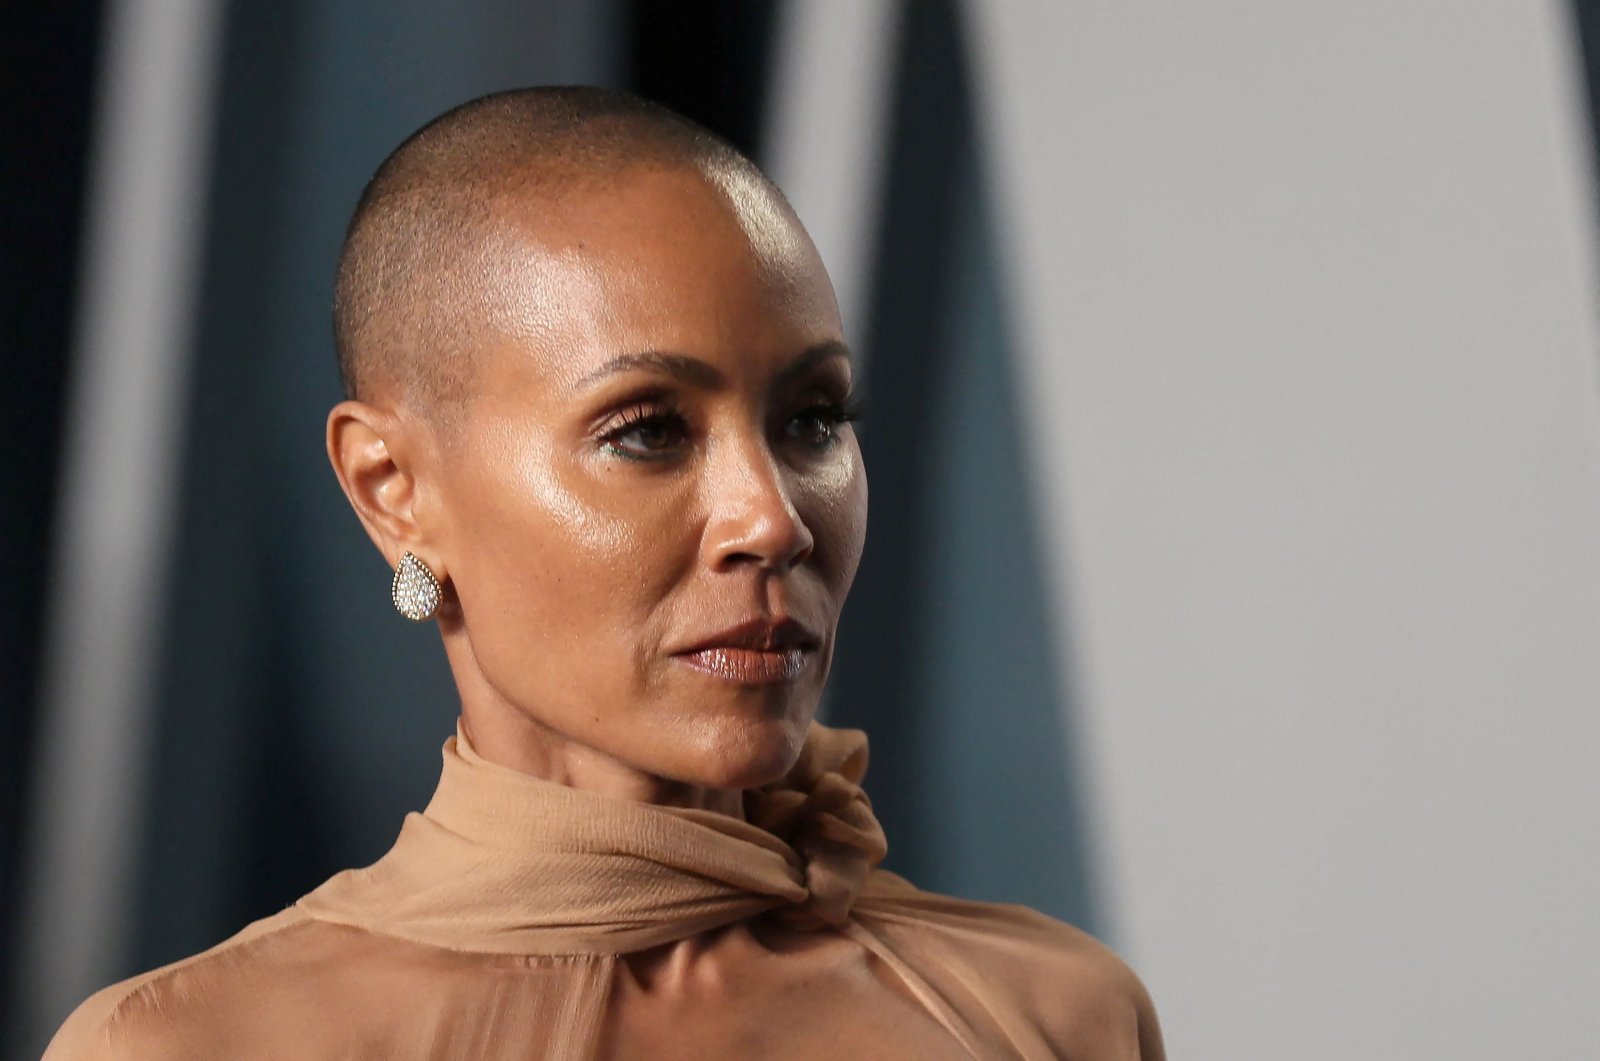 Jada Pinkett Smith arrives at the Vanity Fair Oscar party during the 94th Academy Awards in Beverly Hills, California, U.S., March 27, 2022. (REUTERS Photo)